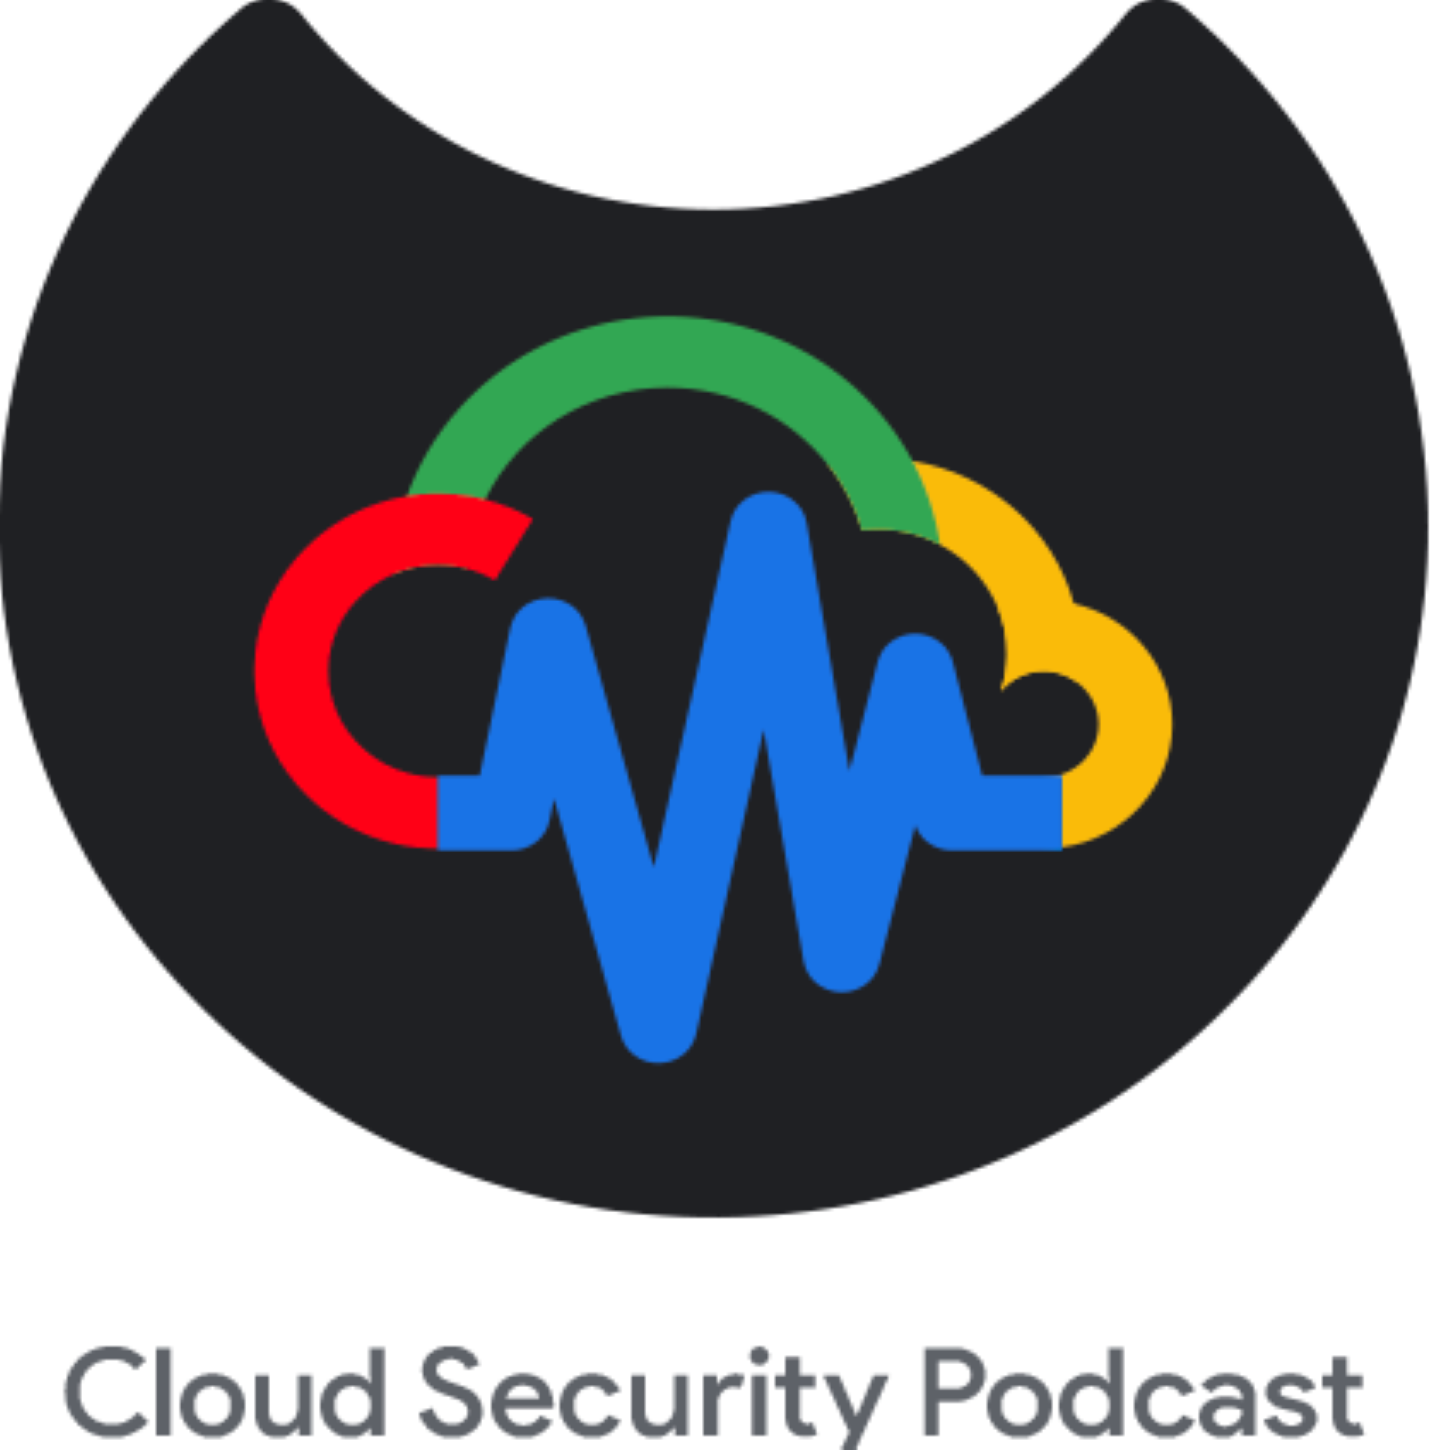 A highlight from EP139 What is Chronicle? Beyond XDR and into the Next Generation of Security Operations